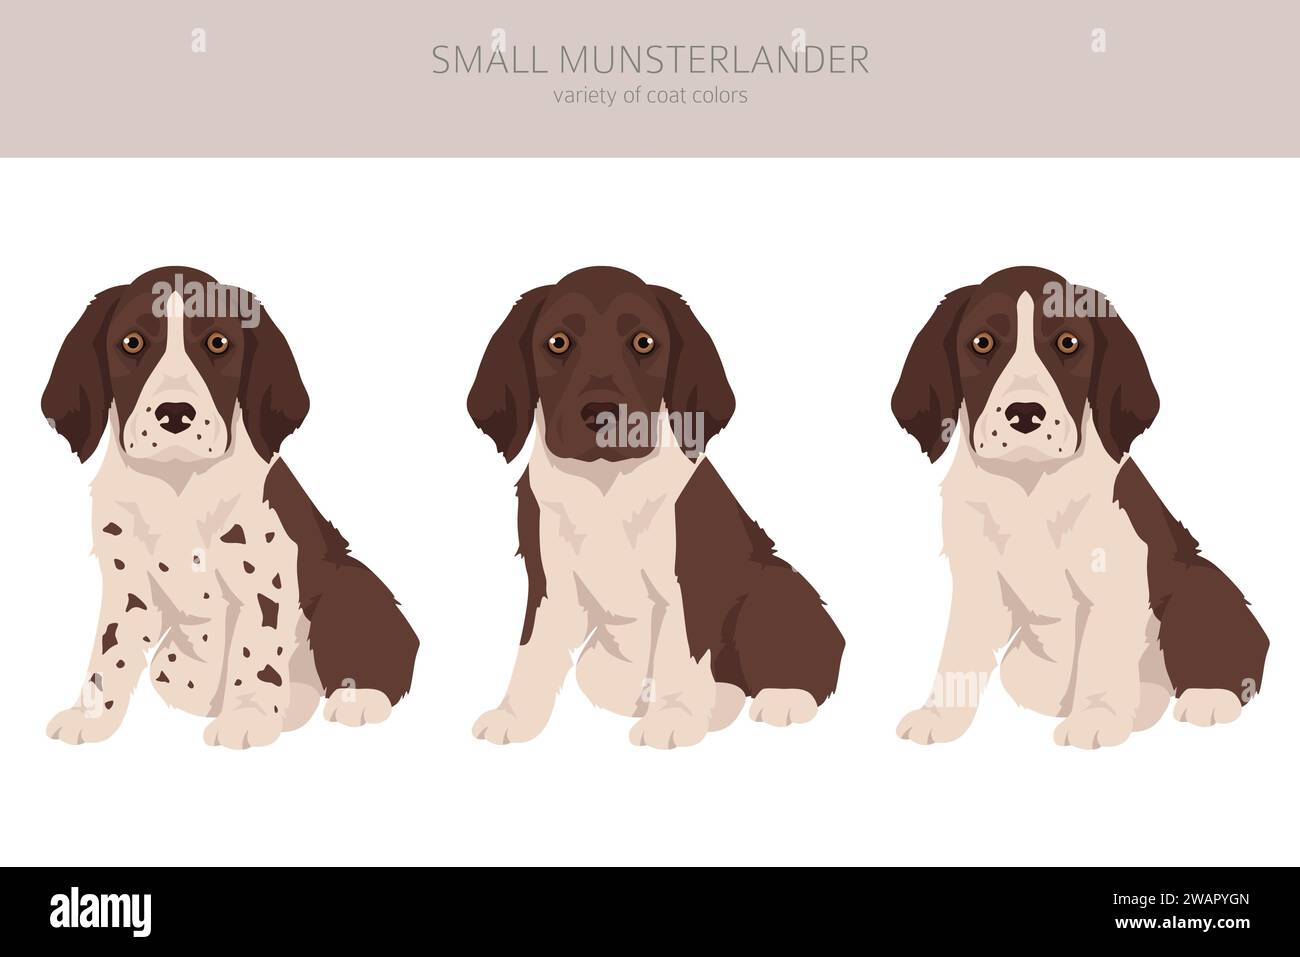 Small Munsterlander puppies coat colors, different poses clipart.  Vector illustration Stock Vector